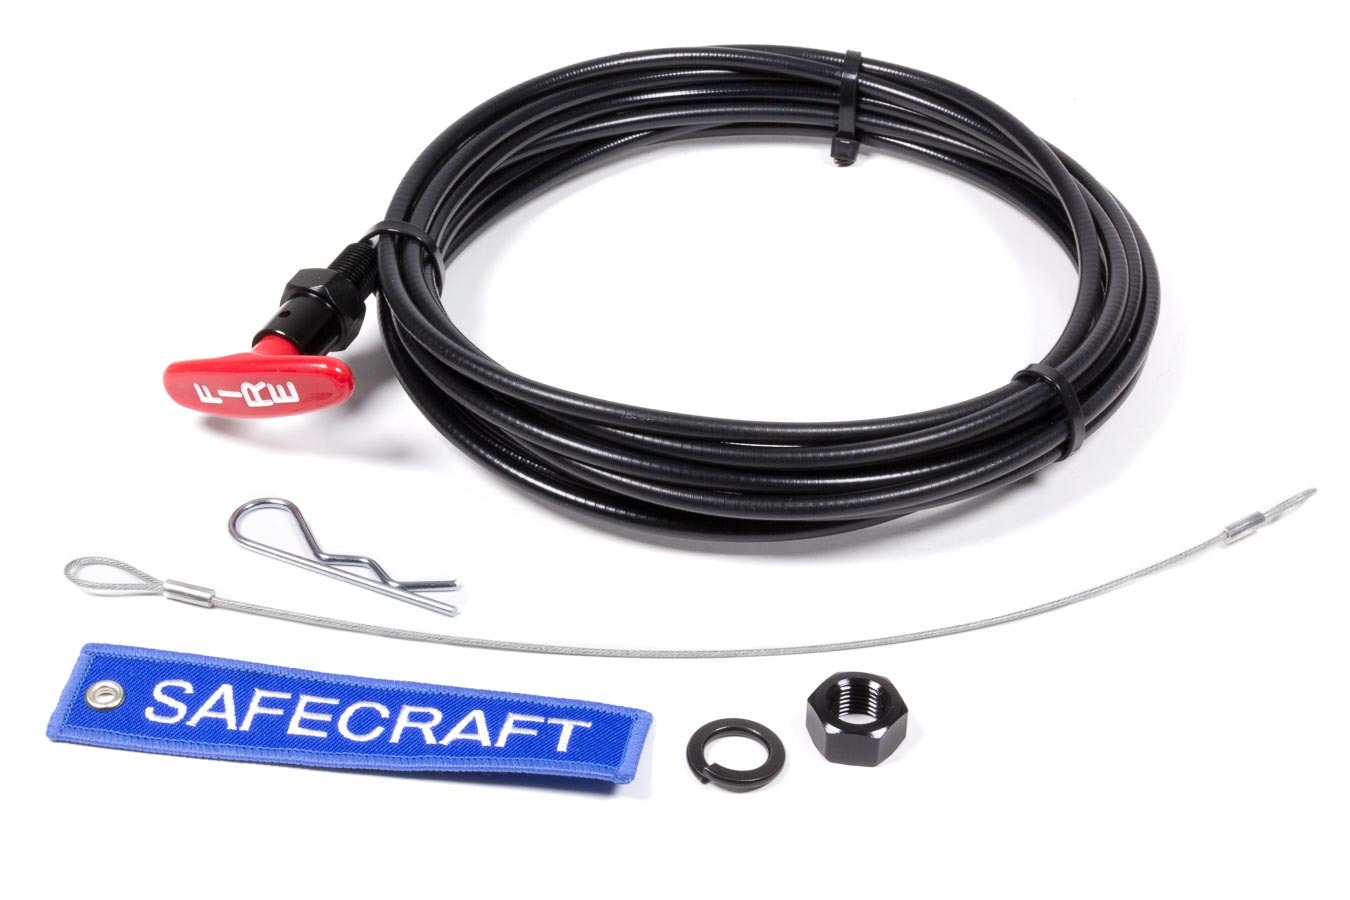 Safecraft 56-1421 Fire Suppression Pull Cable, 15 ft Long, Handle Included, Kit